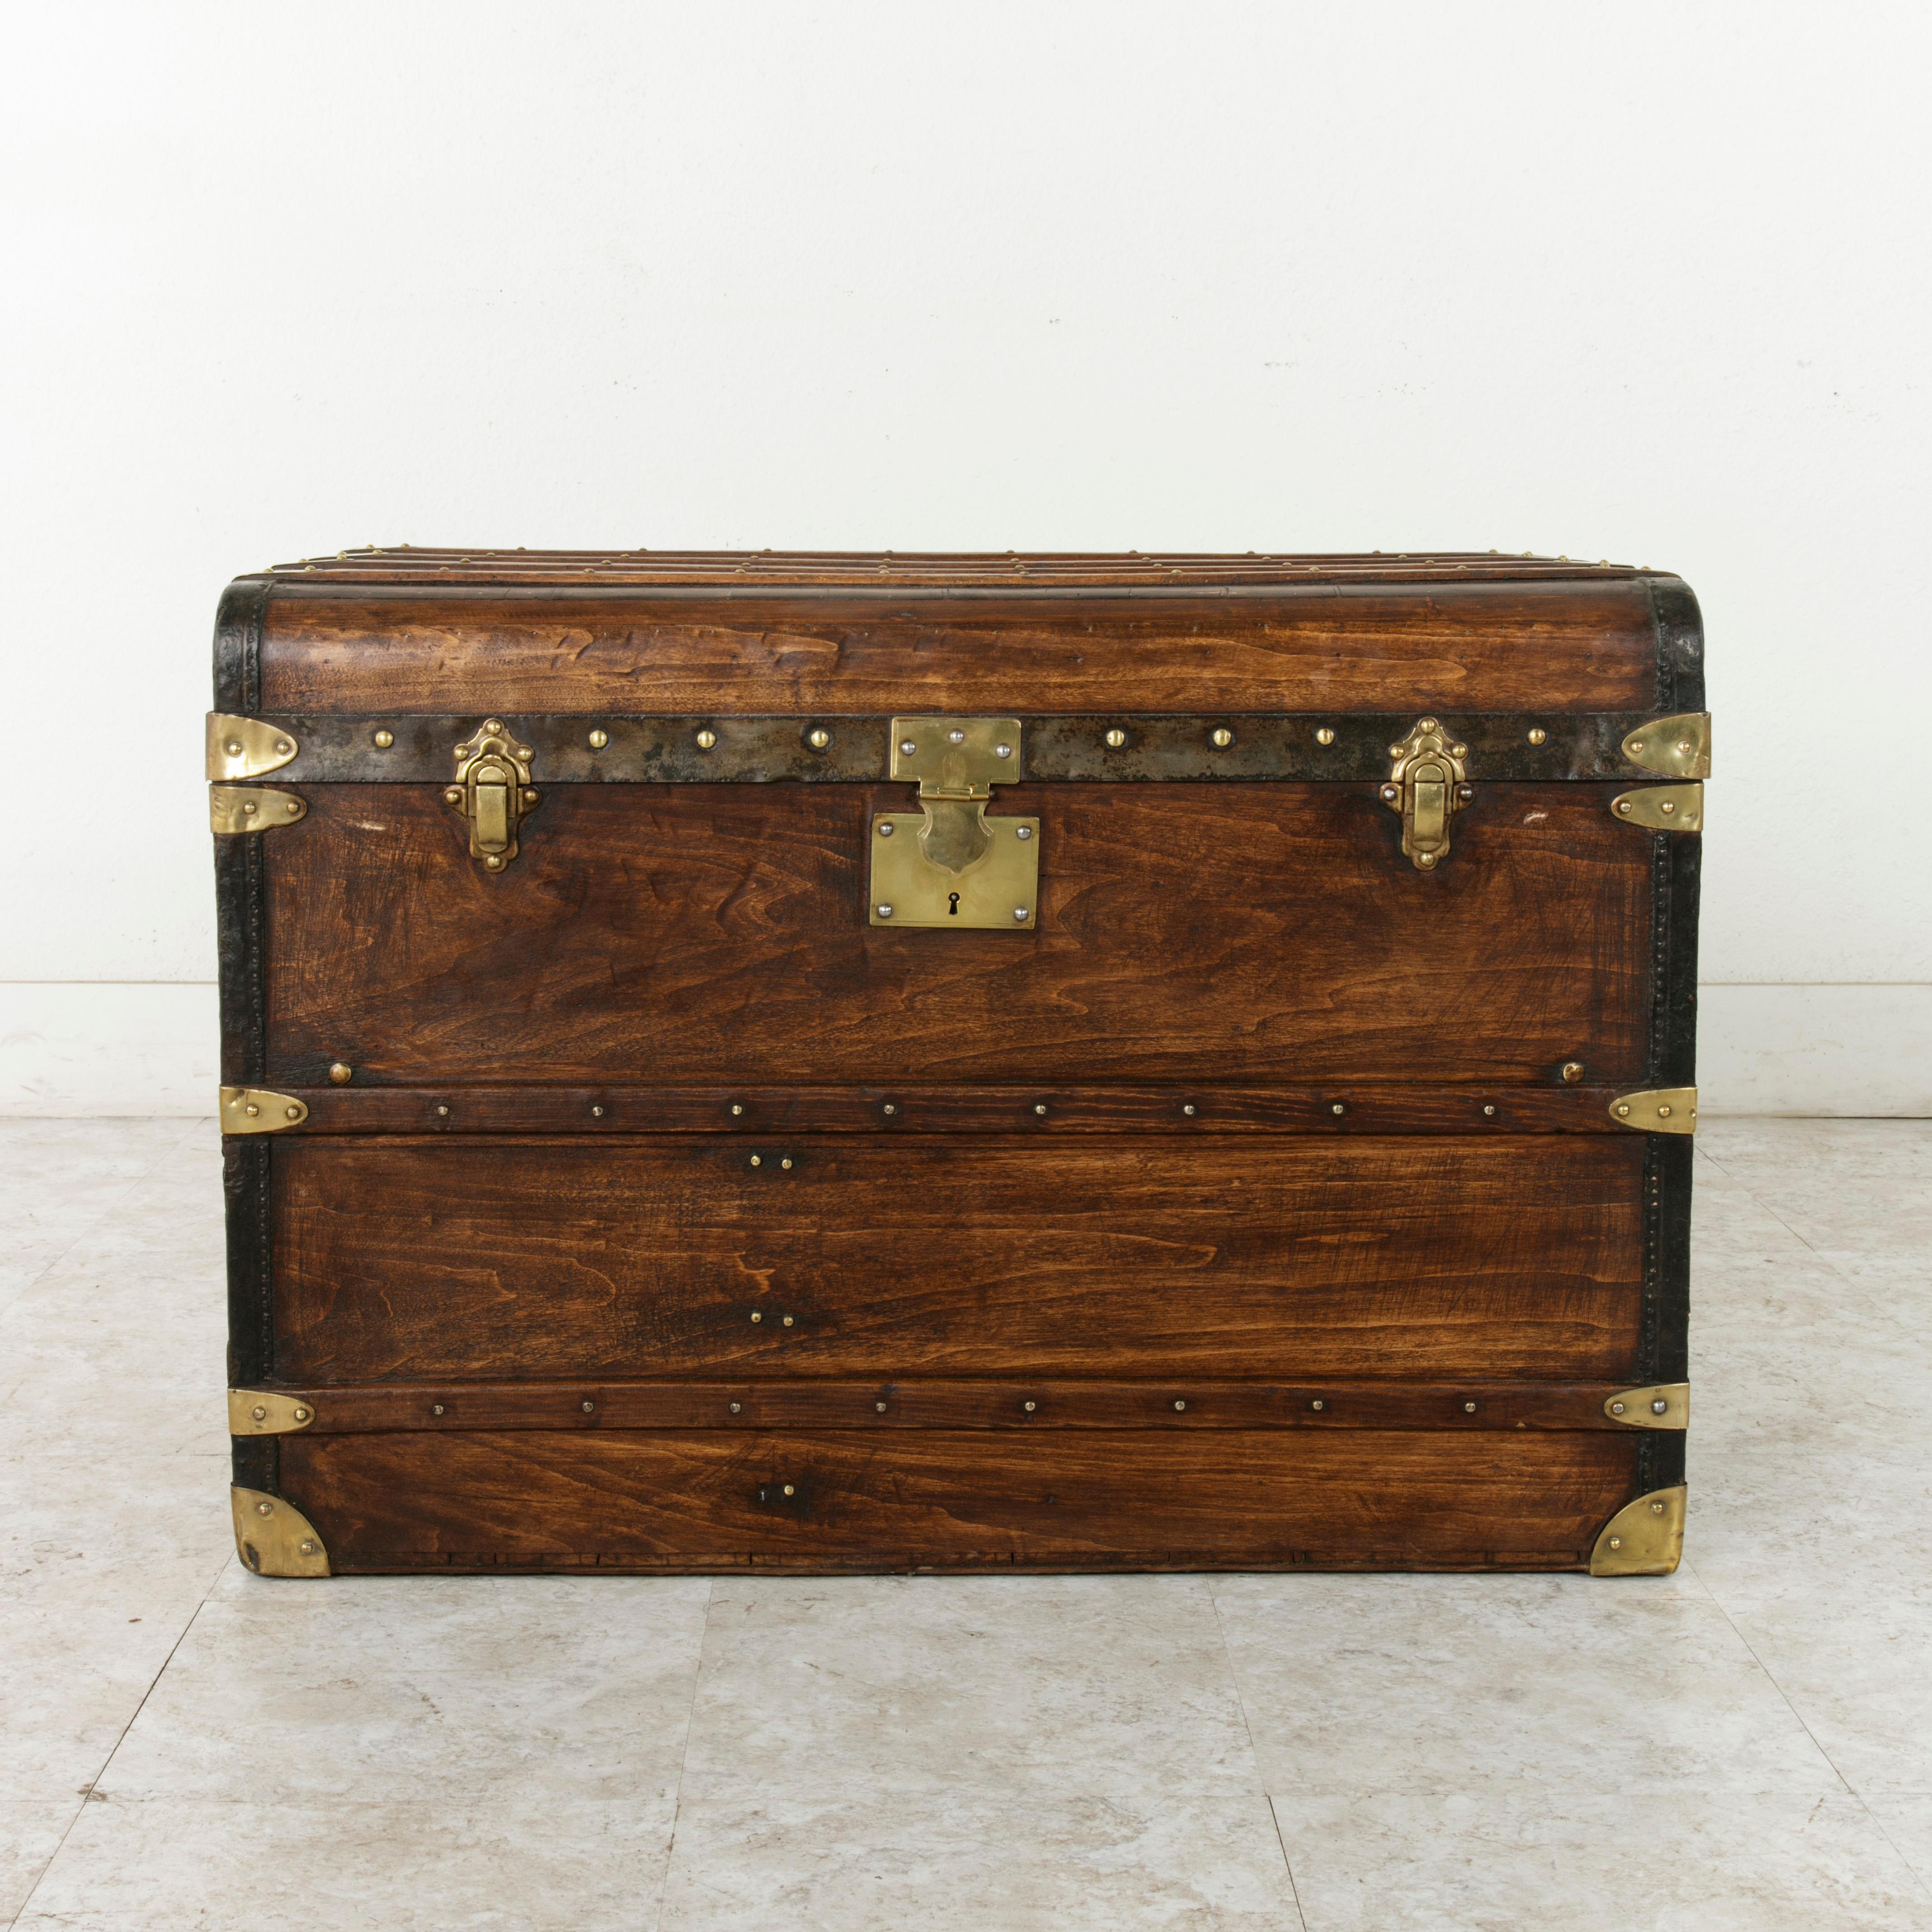 This French wooden steam trunk from the turn of the 20th century features a patch on the back marked Autobus Stock, Neris-les-Bains, Correspondance du P.O. This patch indicates the trunk's use later in the century for bus transportation in the